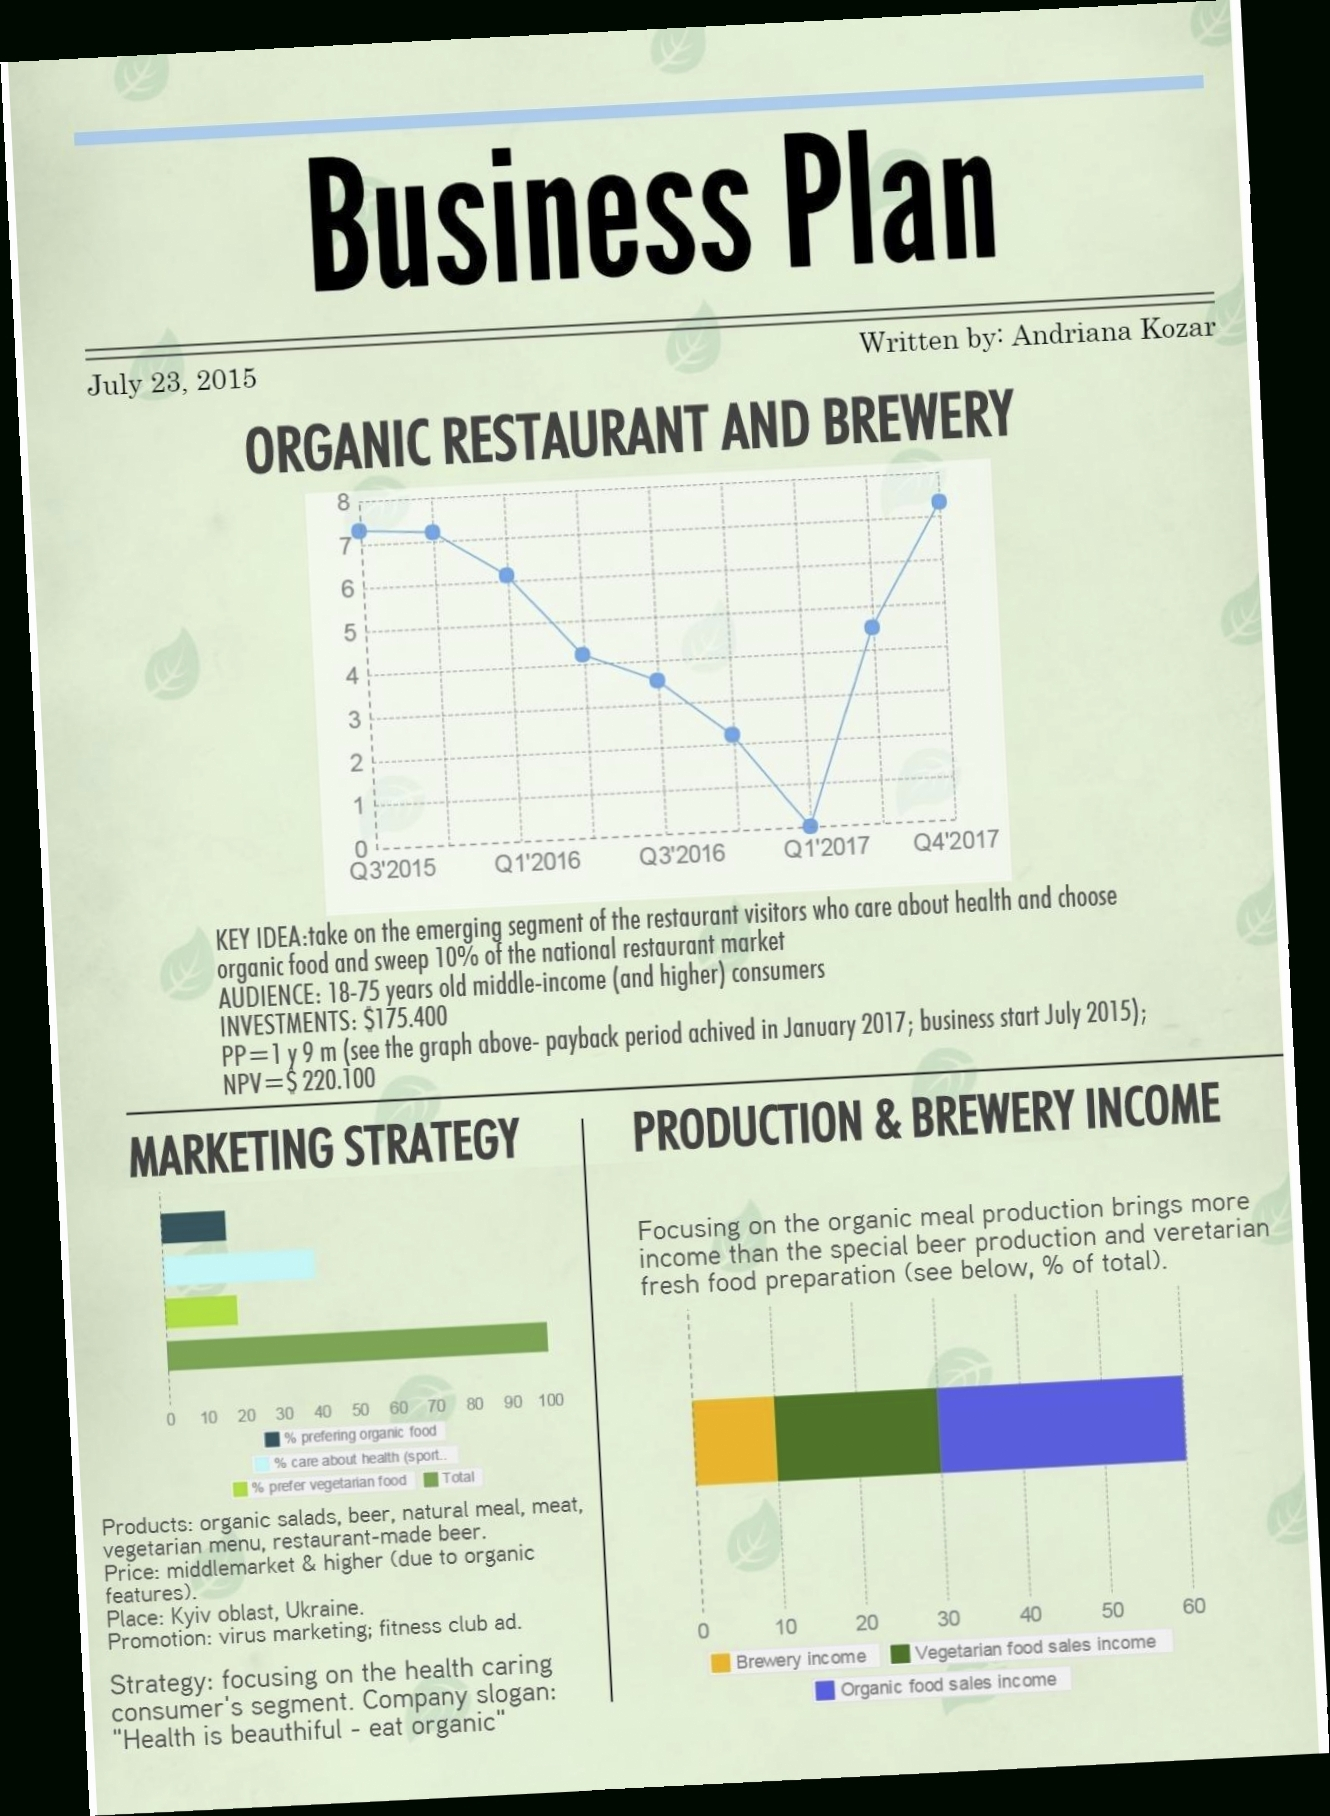 brewery startup business plan